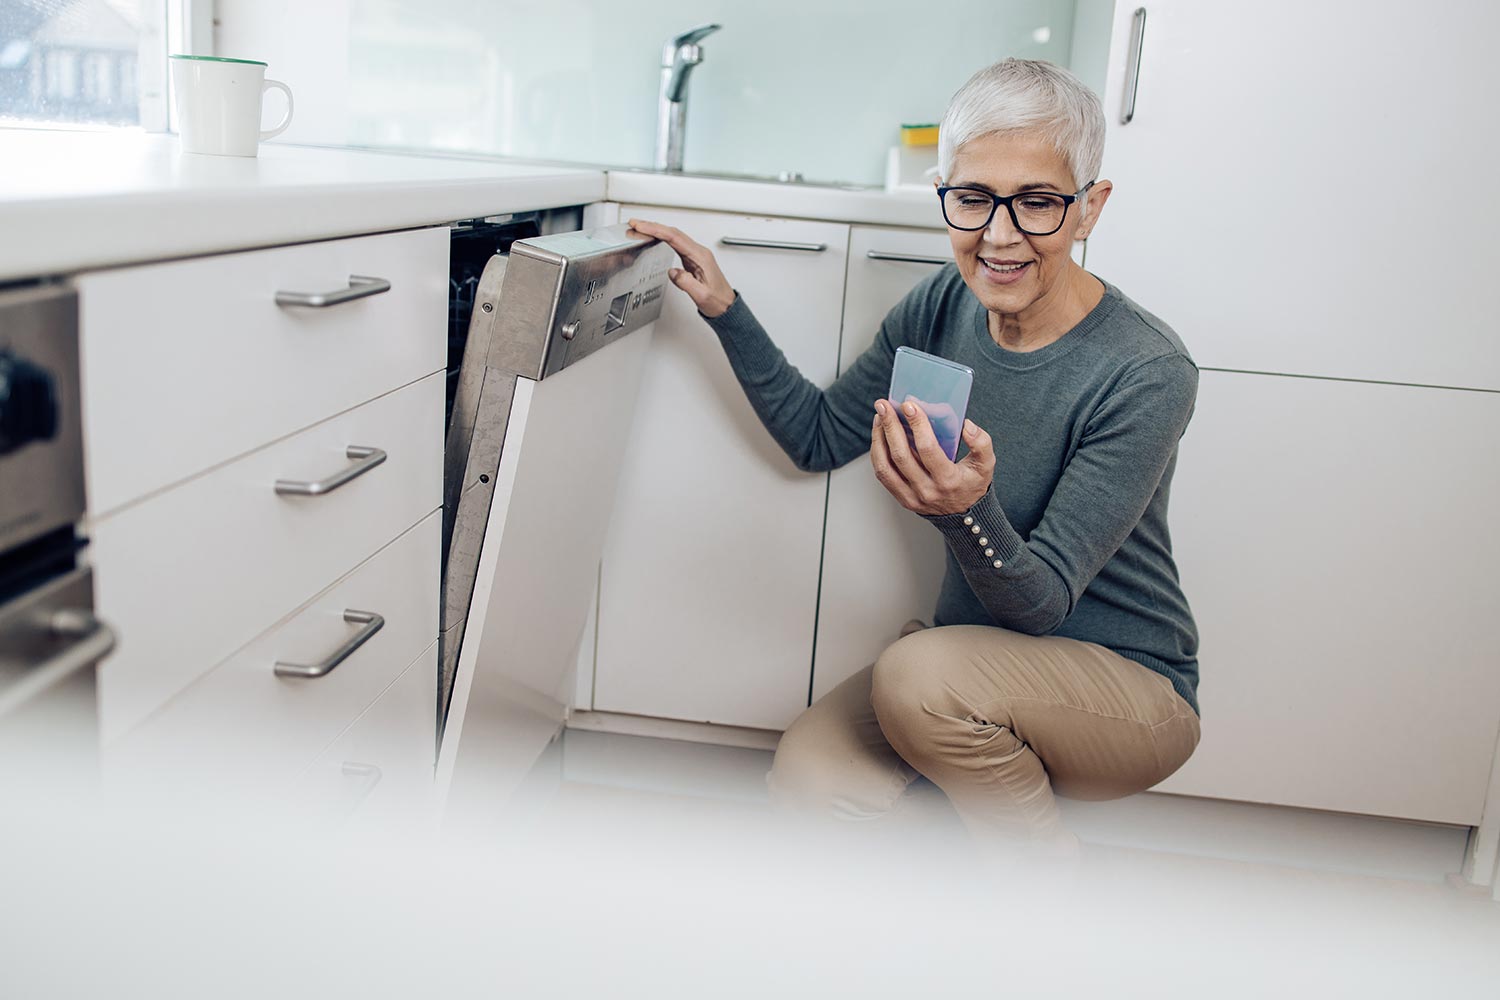 Mature woman checking an online tutorial before turning on her dishwasher